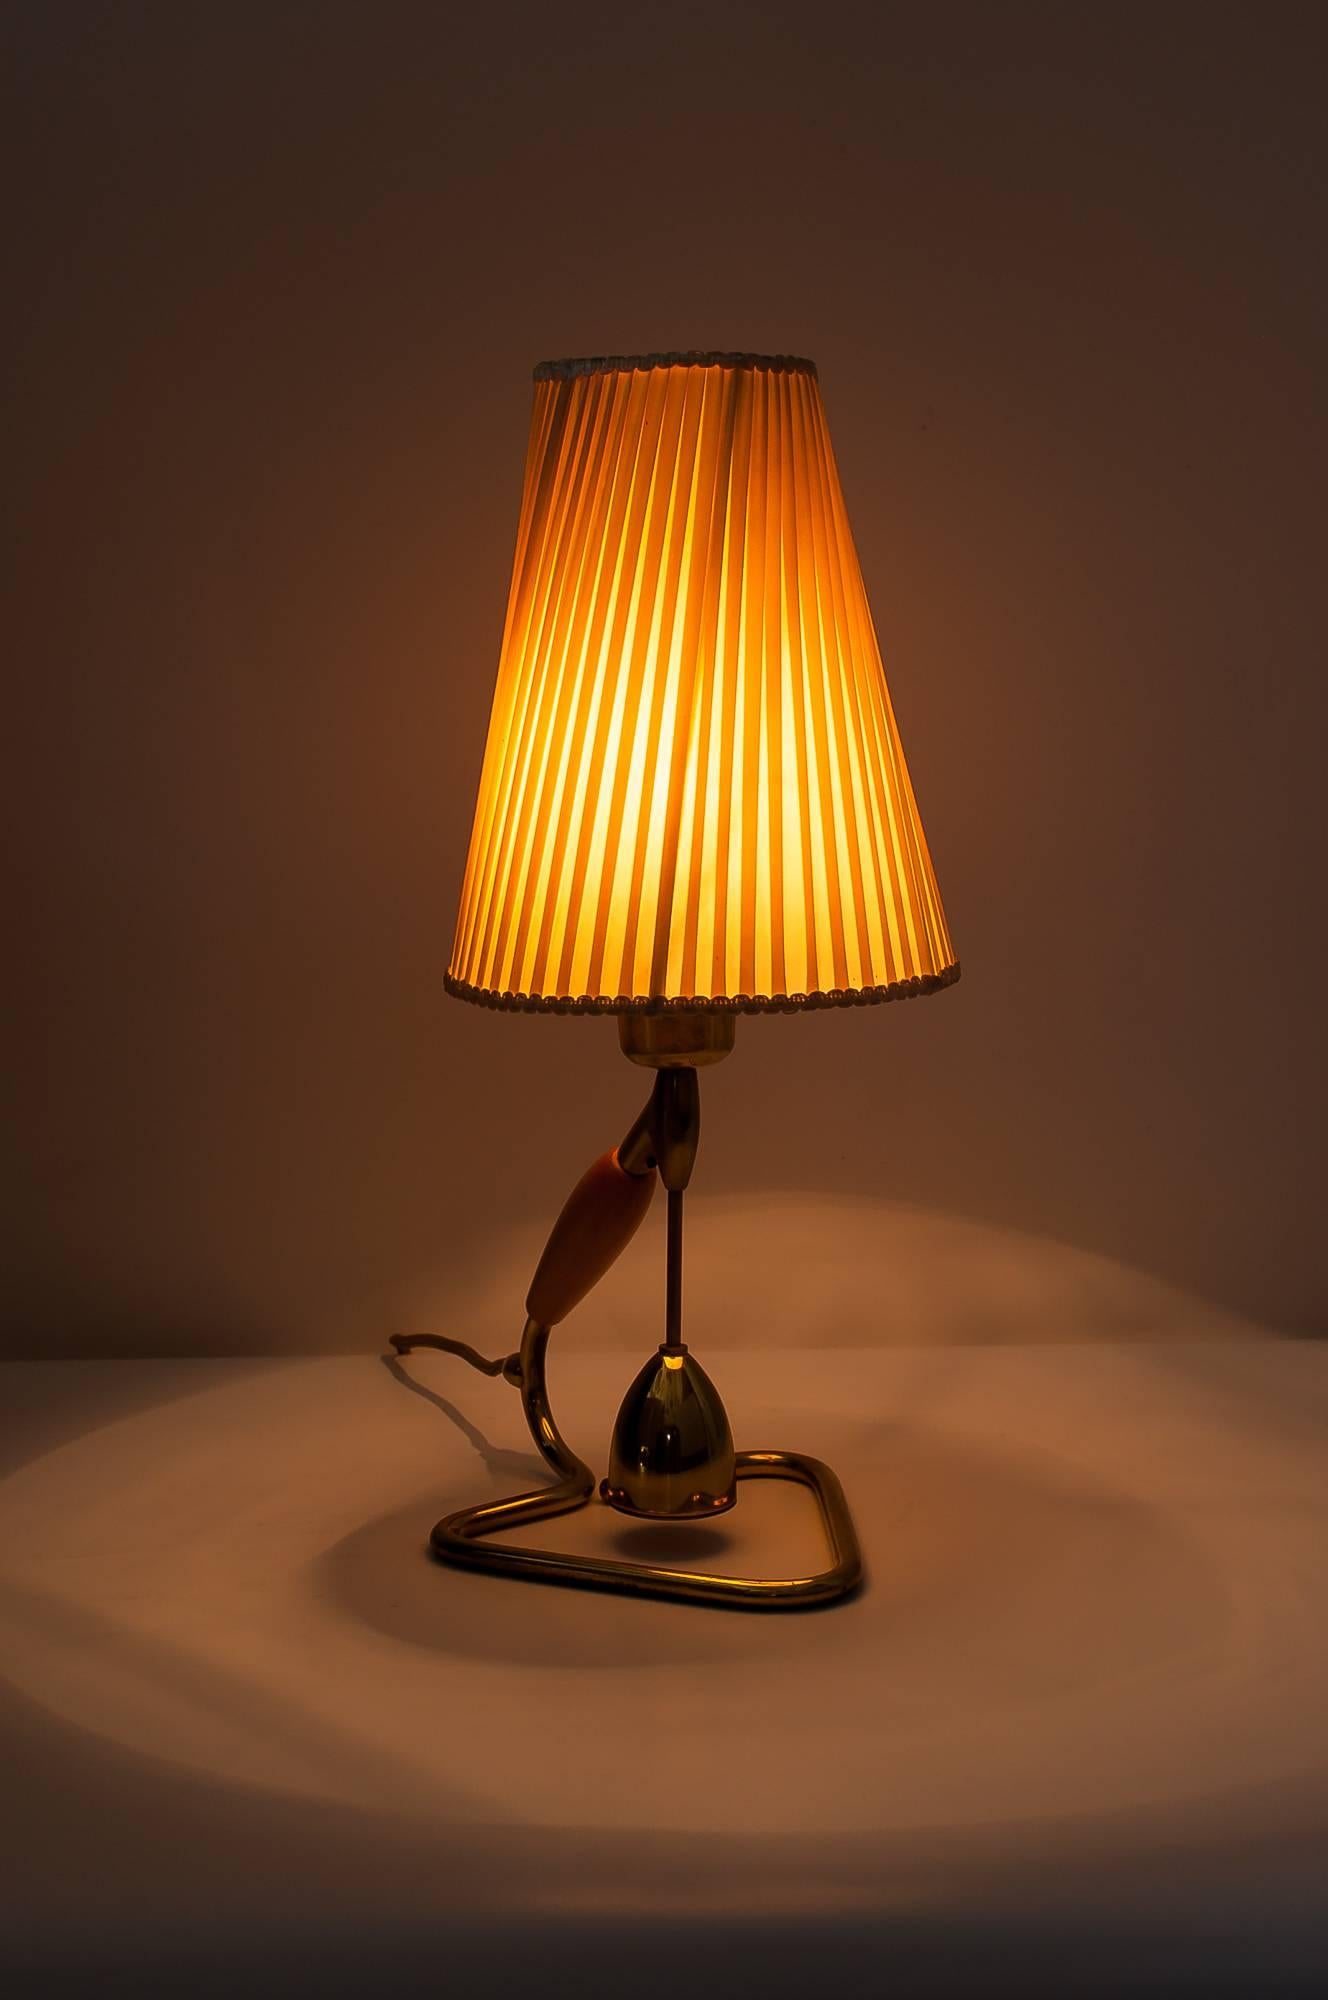 Lacquered Rupert Nikoll Table or Wall Lamp